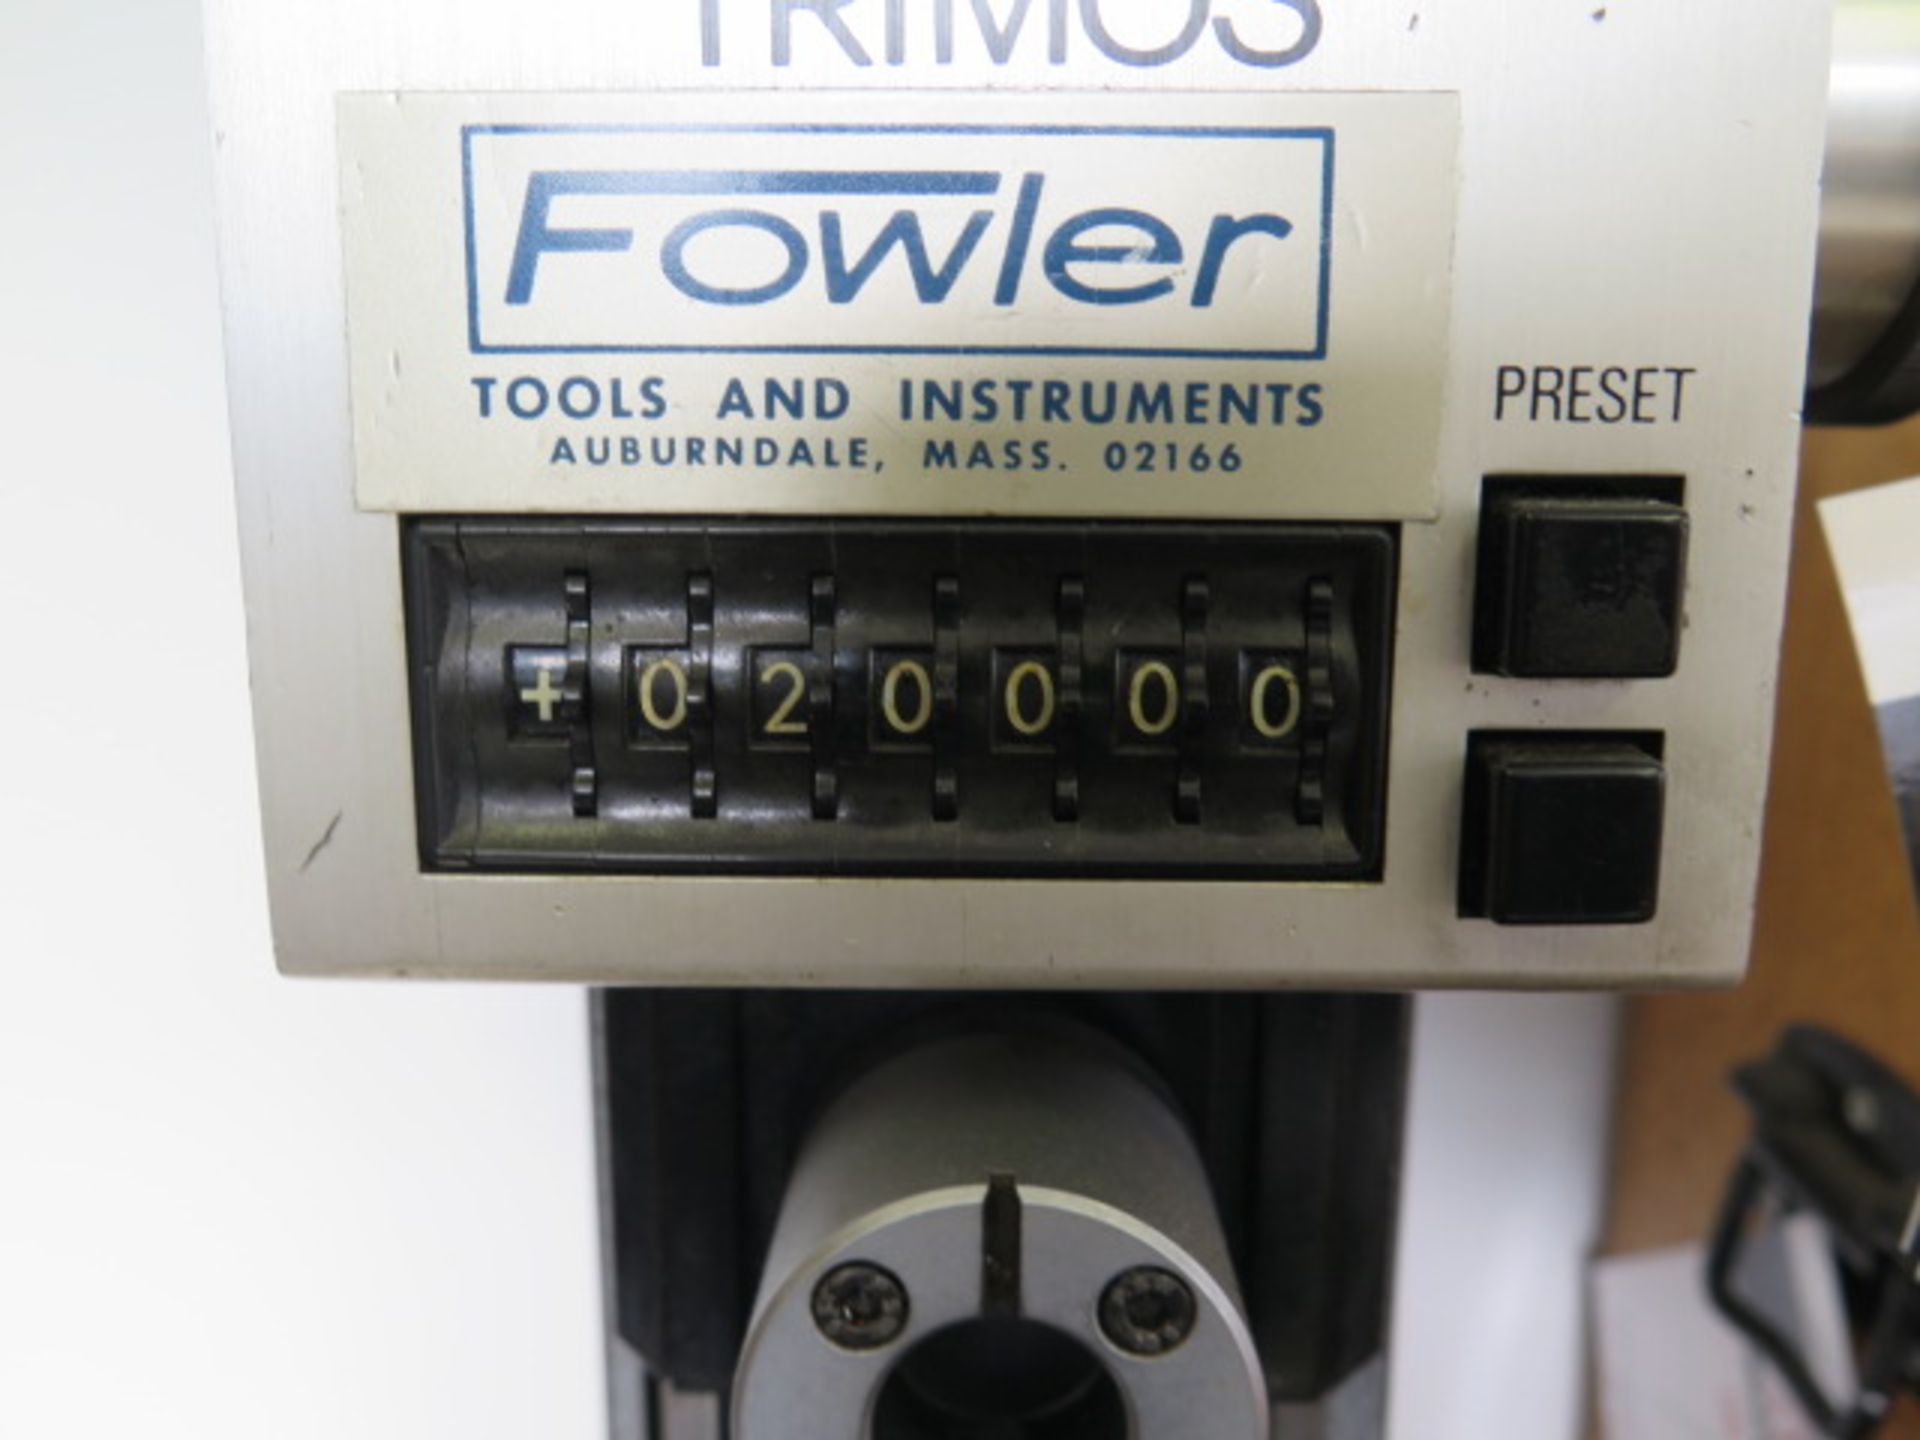 Fowler Trimos "Vertical 500" 19" Digital Height Gage (SOLD AS-IS - NO WARRANTY) - Image 8 of 8